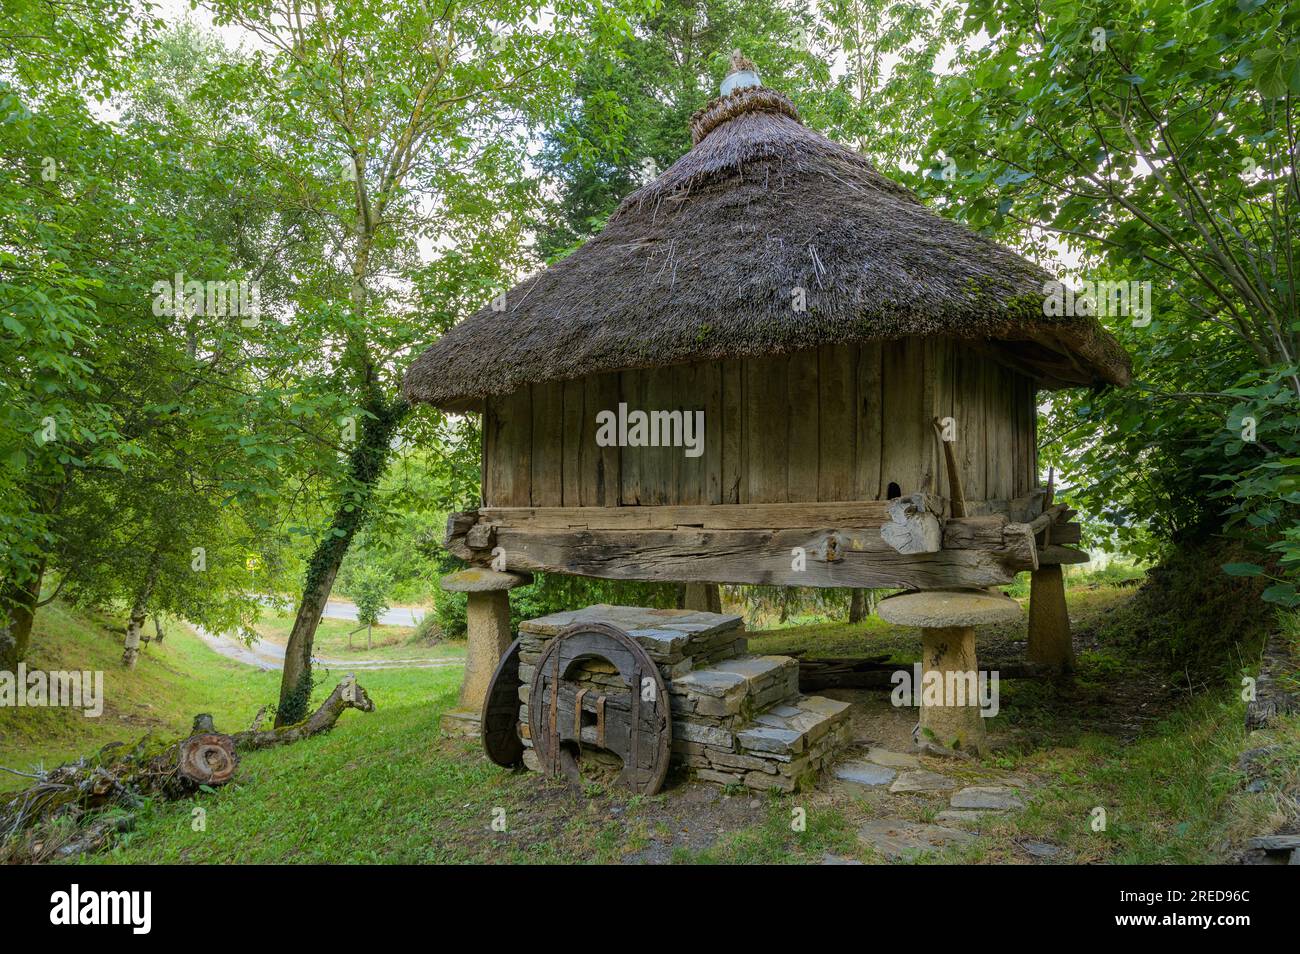 A typical Galician Granary in the spanish countryside Stock Photo